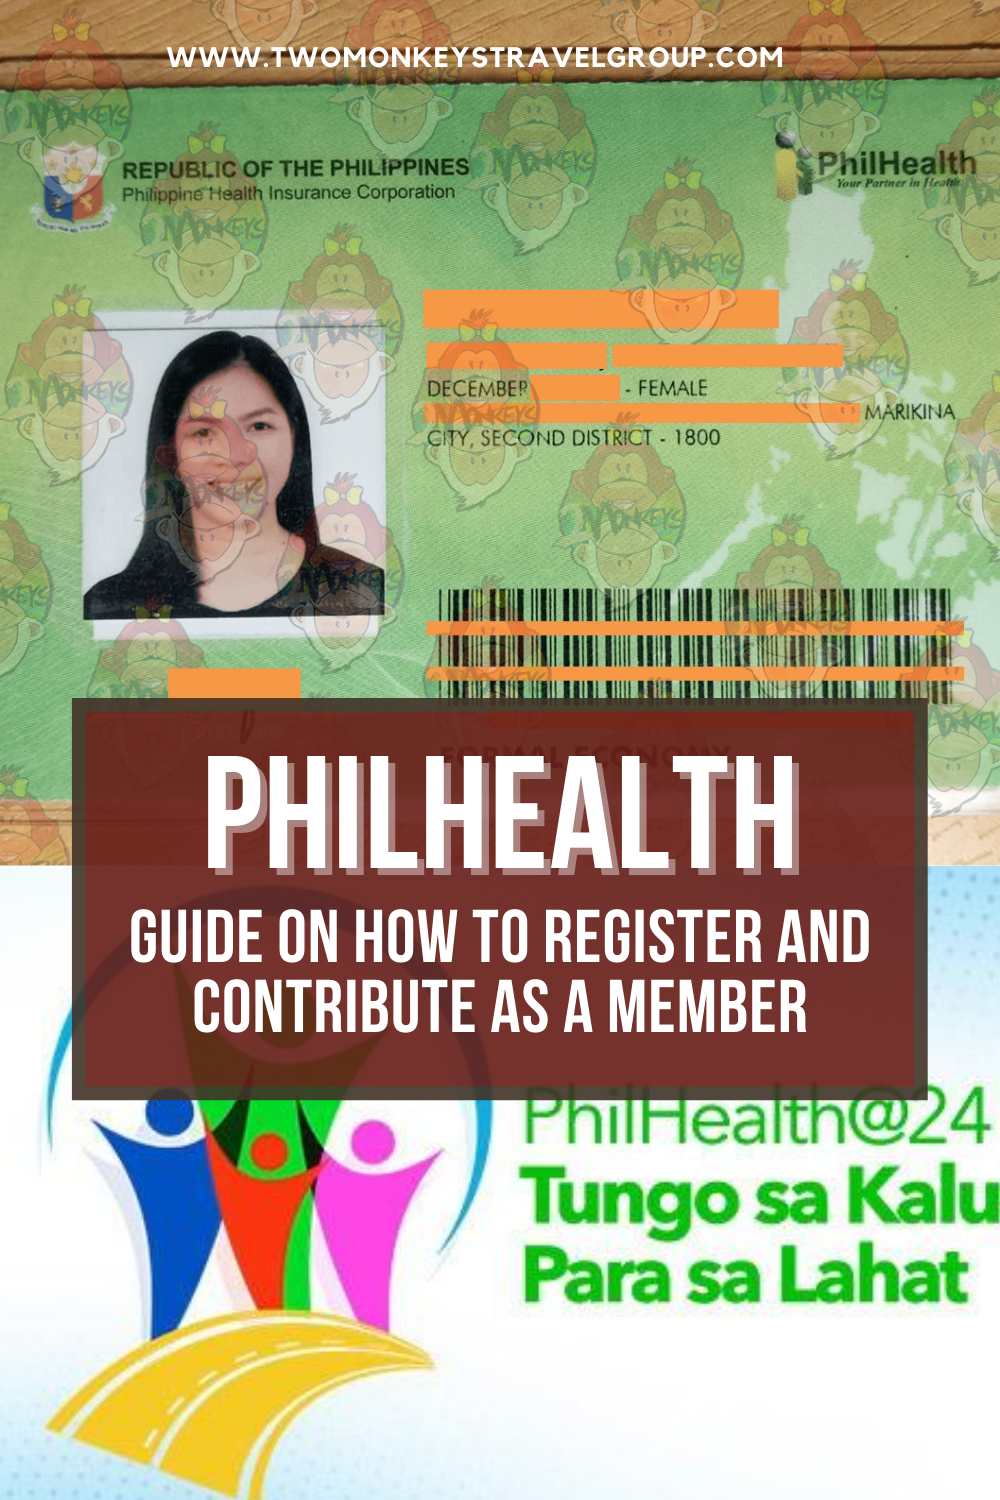 Guide on How to Register and Contribute as a PhilHealth Member